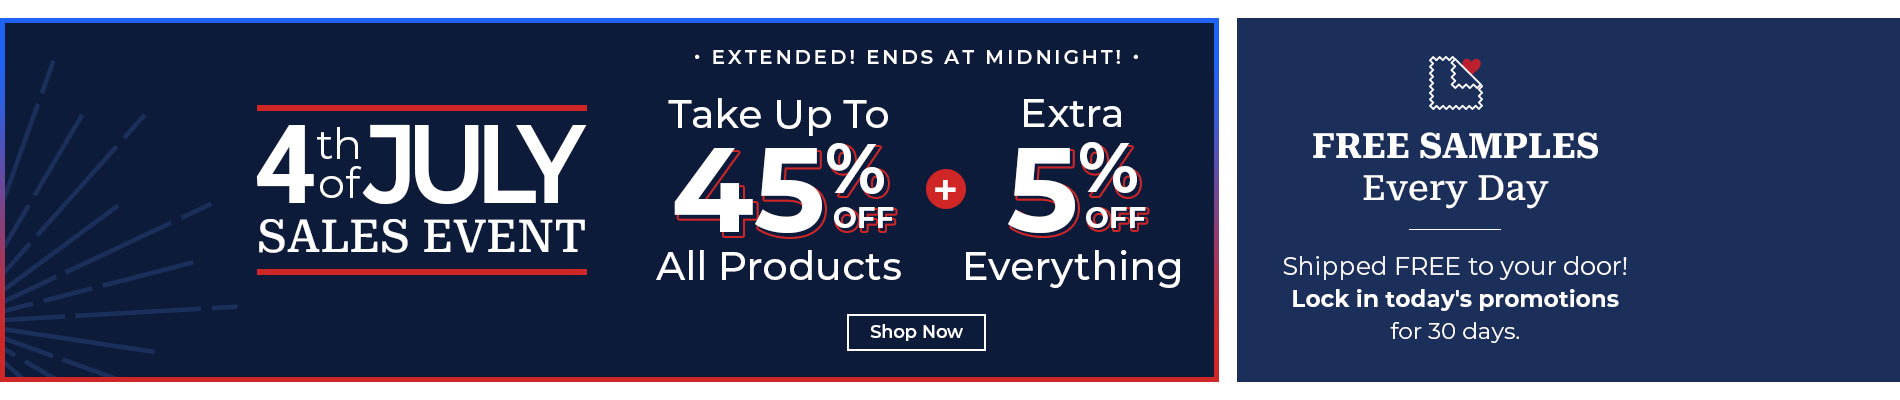 Take Up To 45% Off + Extra 5% Off Everything!